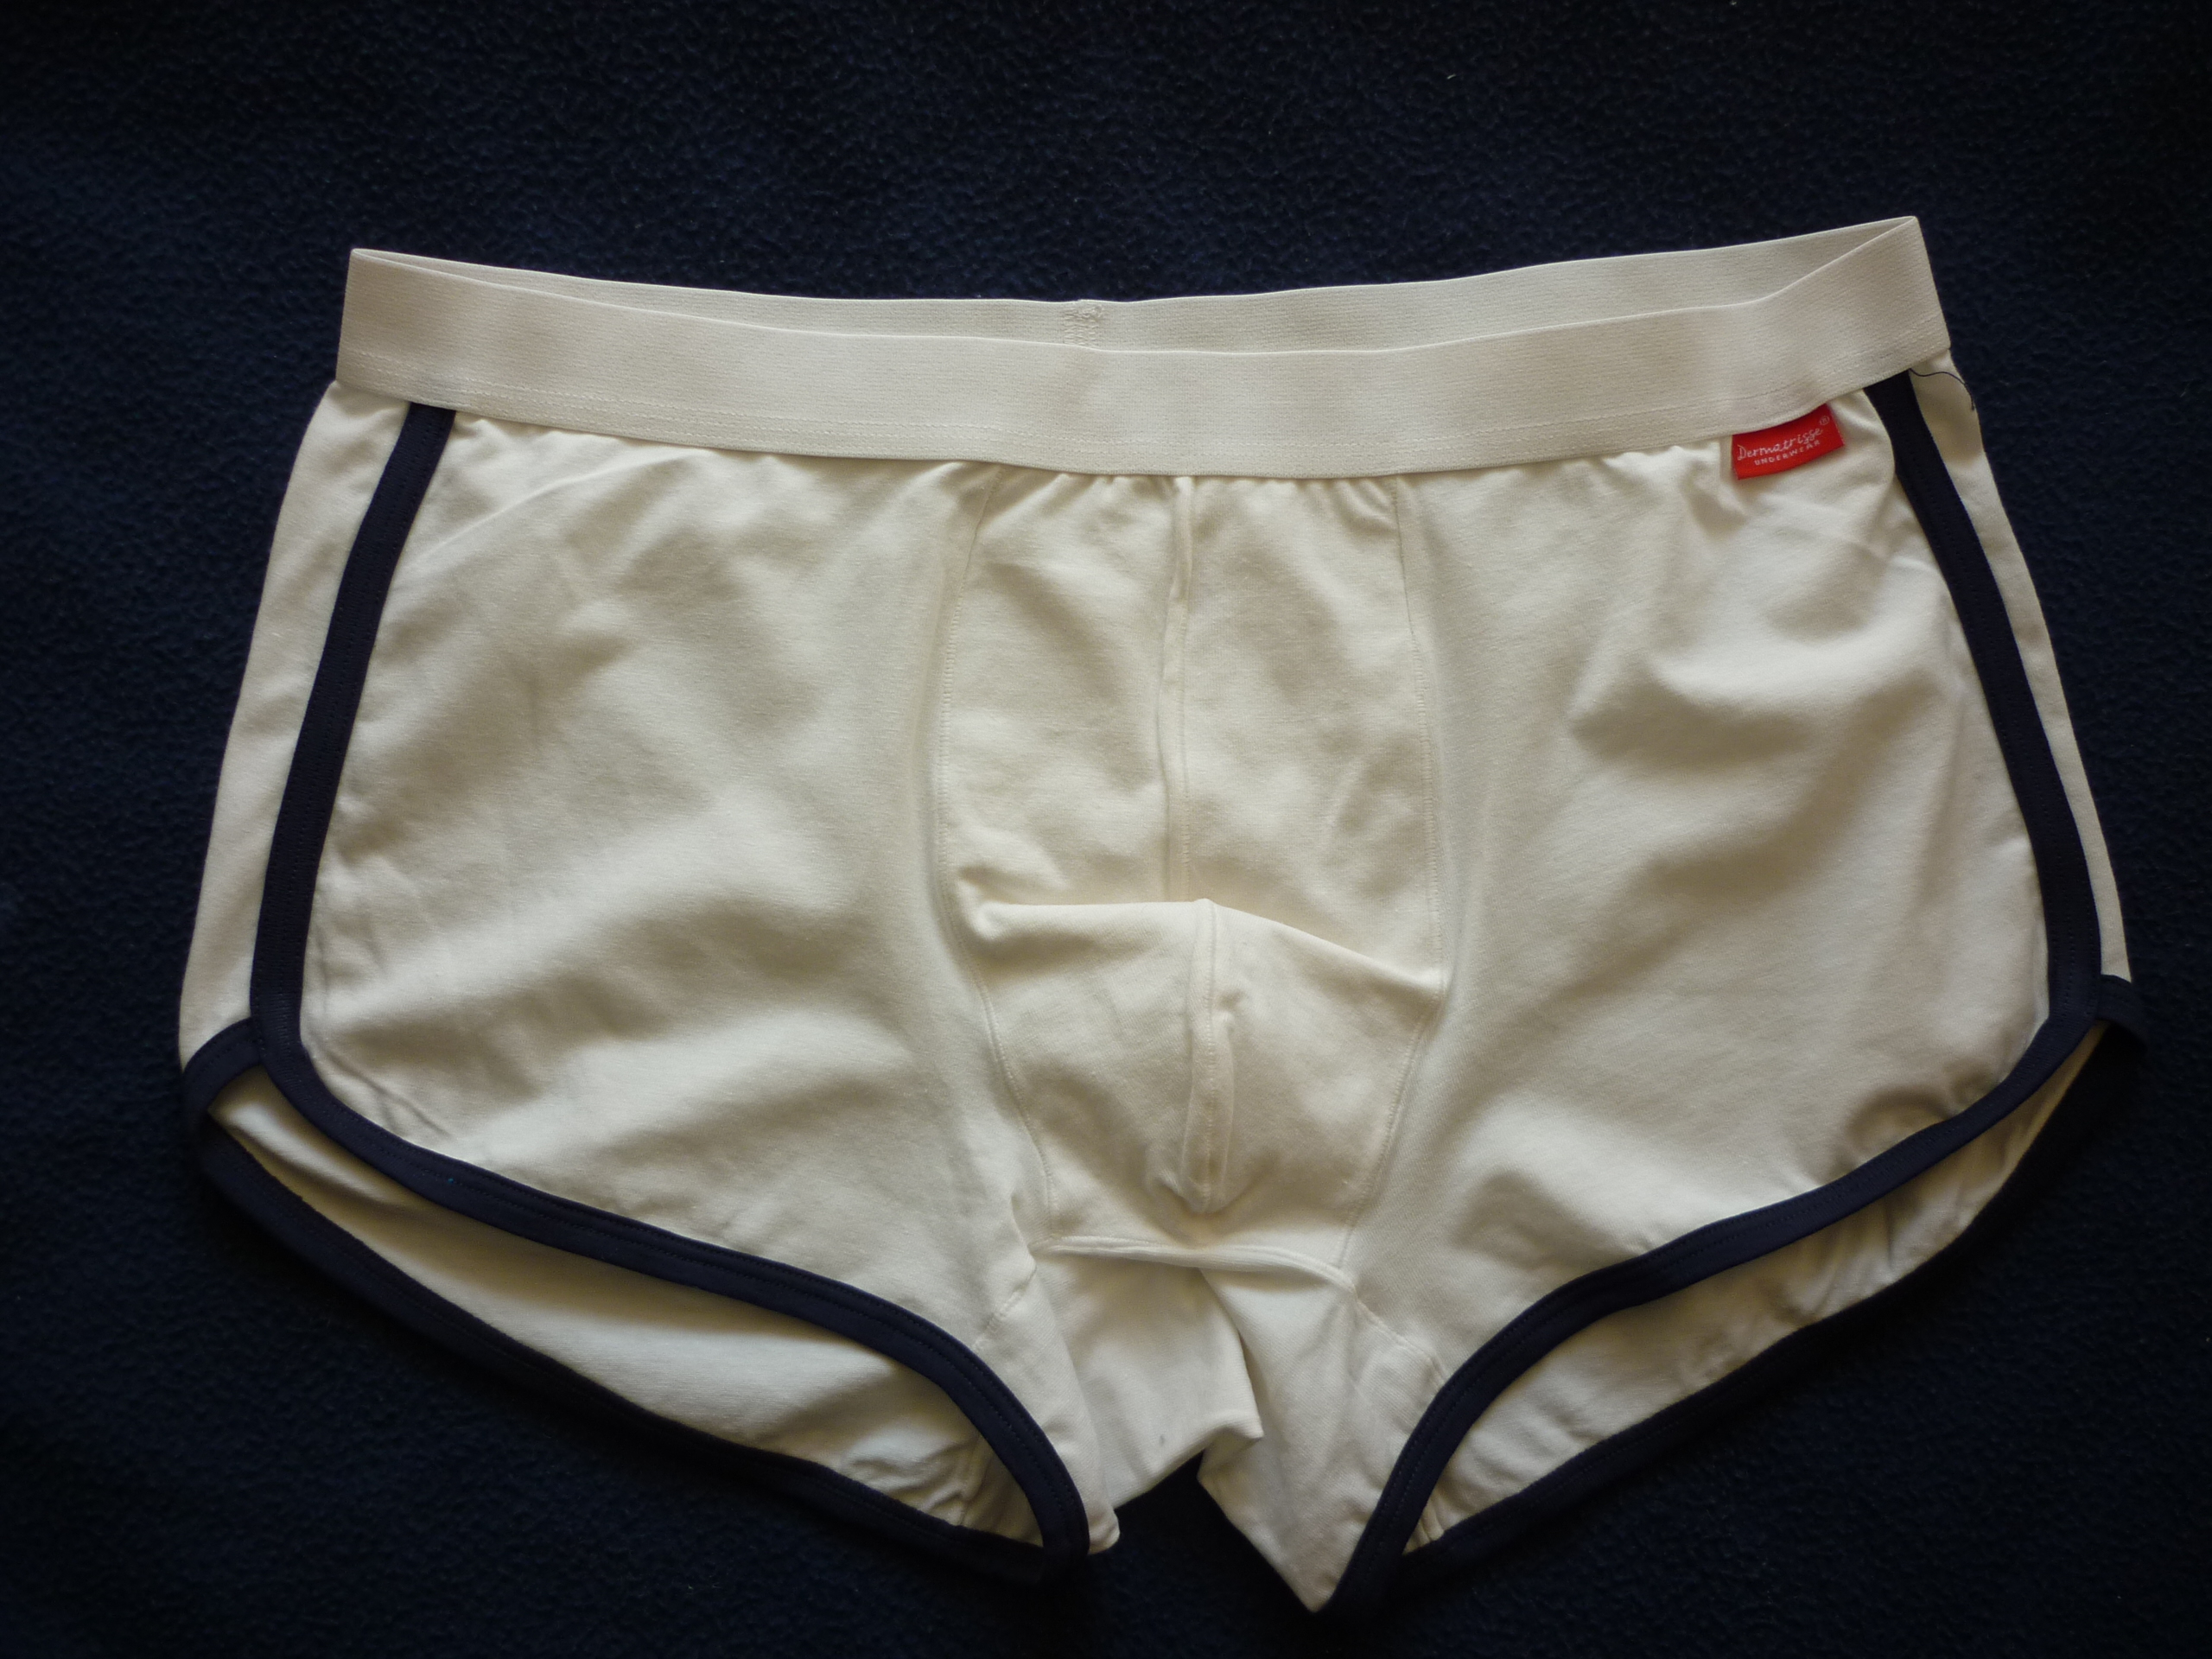 MEN'S UNDERWEAR (BRIEF) II GUARANTEED TOP QUALITY II OFF WHITE WITH NAVY LINING IIDON'T MISS THIS CHANCE-3 Pcs.II FREE HOME DELIVERY(POST NORD)IIDISCOUNT 35% IIART.No.190822-1060334